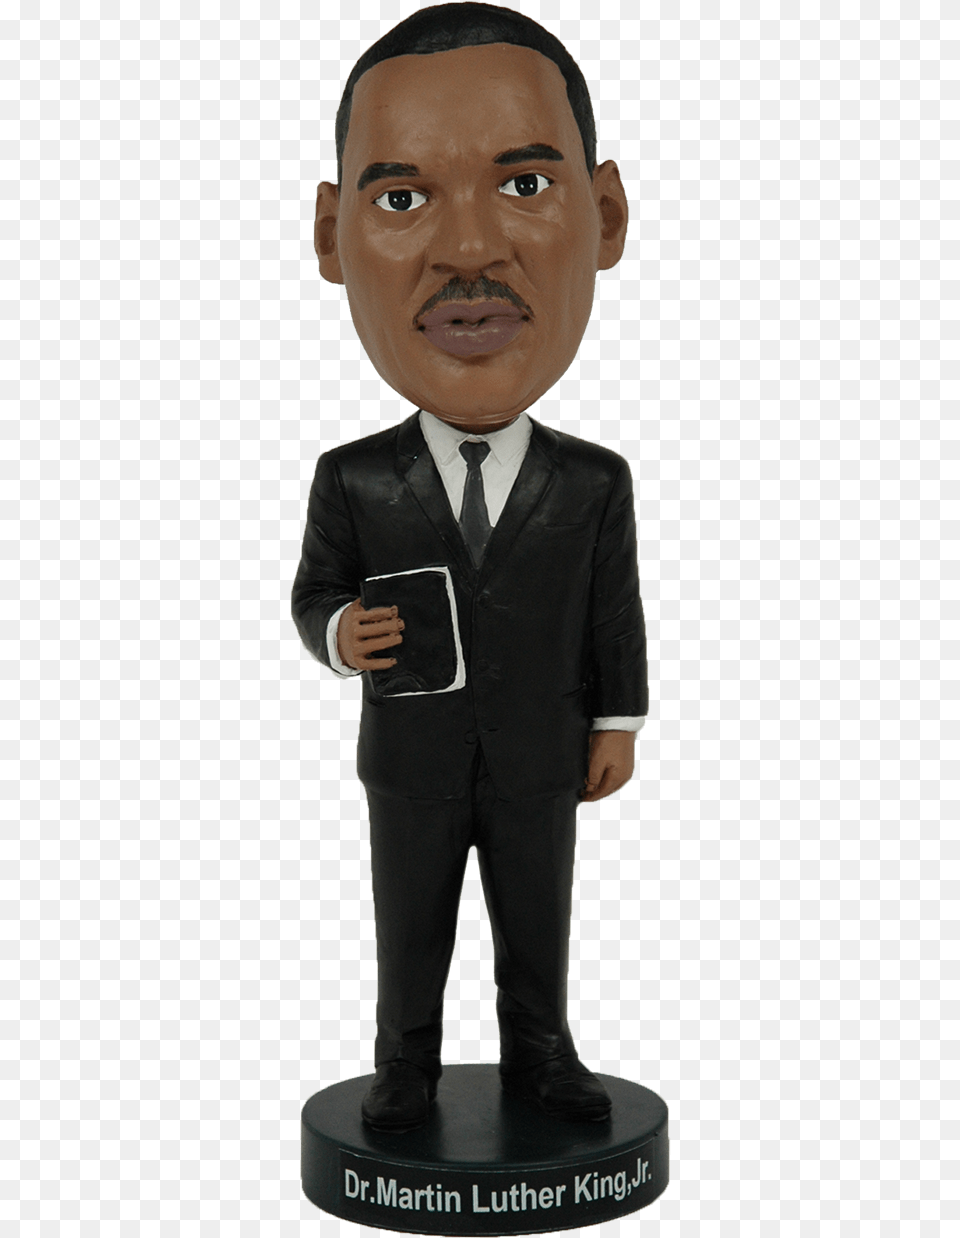 Martin Luther King Bobblehead, Formal Wear, Clothing, Suit, Figurine Png